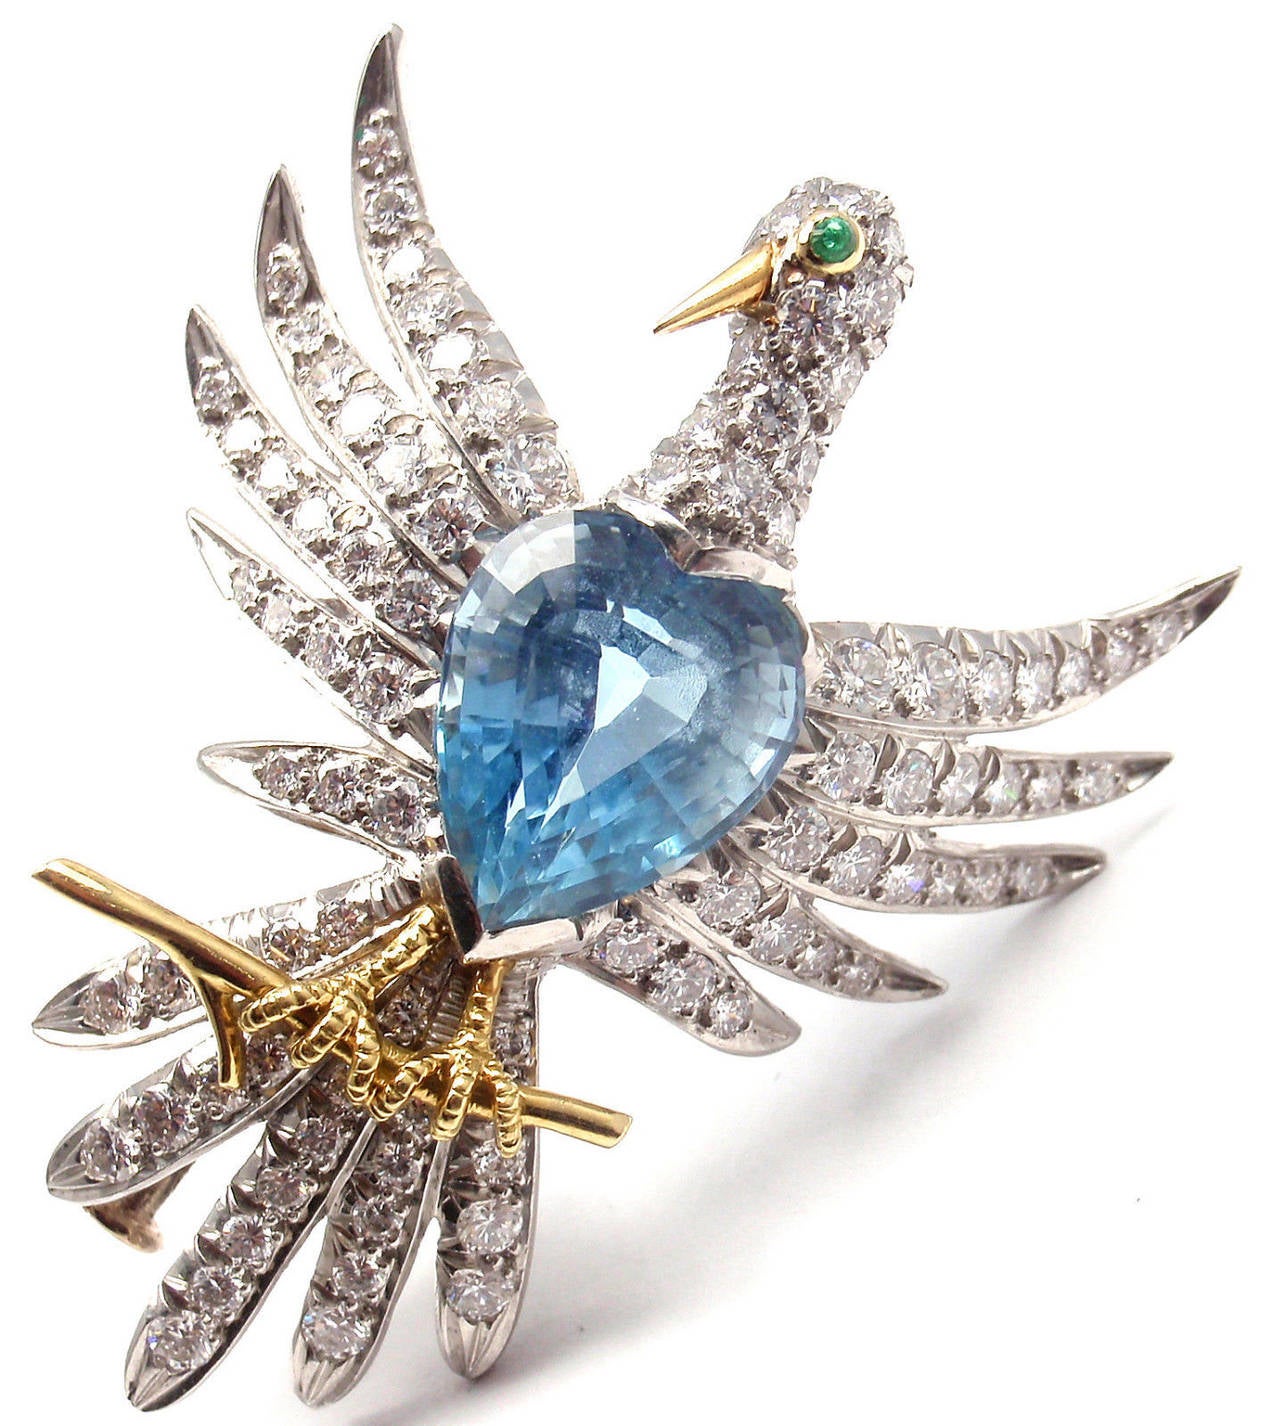 Platinum Diamond Aquamarine Phoenix Bird Brooch/Pin by Jean Schlumberger for Tiffany & Co.
With 89 round brilliant cut diamonds VS1 clarity, G color total weight approx. 1.7ct
1 aquamarine 12mm x 10mm approx. 7.85ct
1small round emerald

This